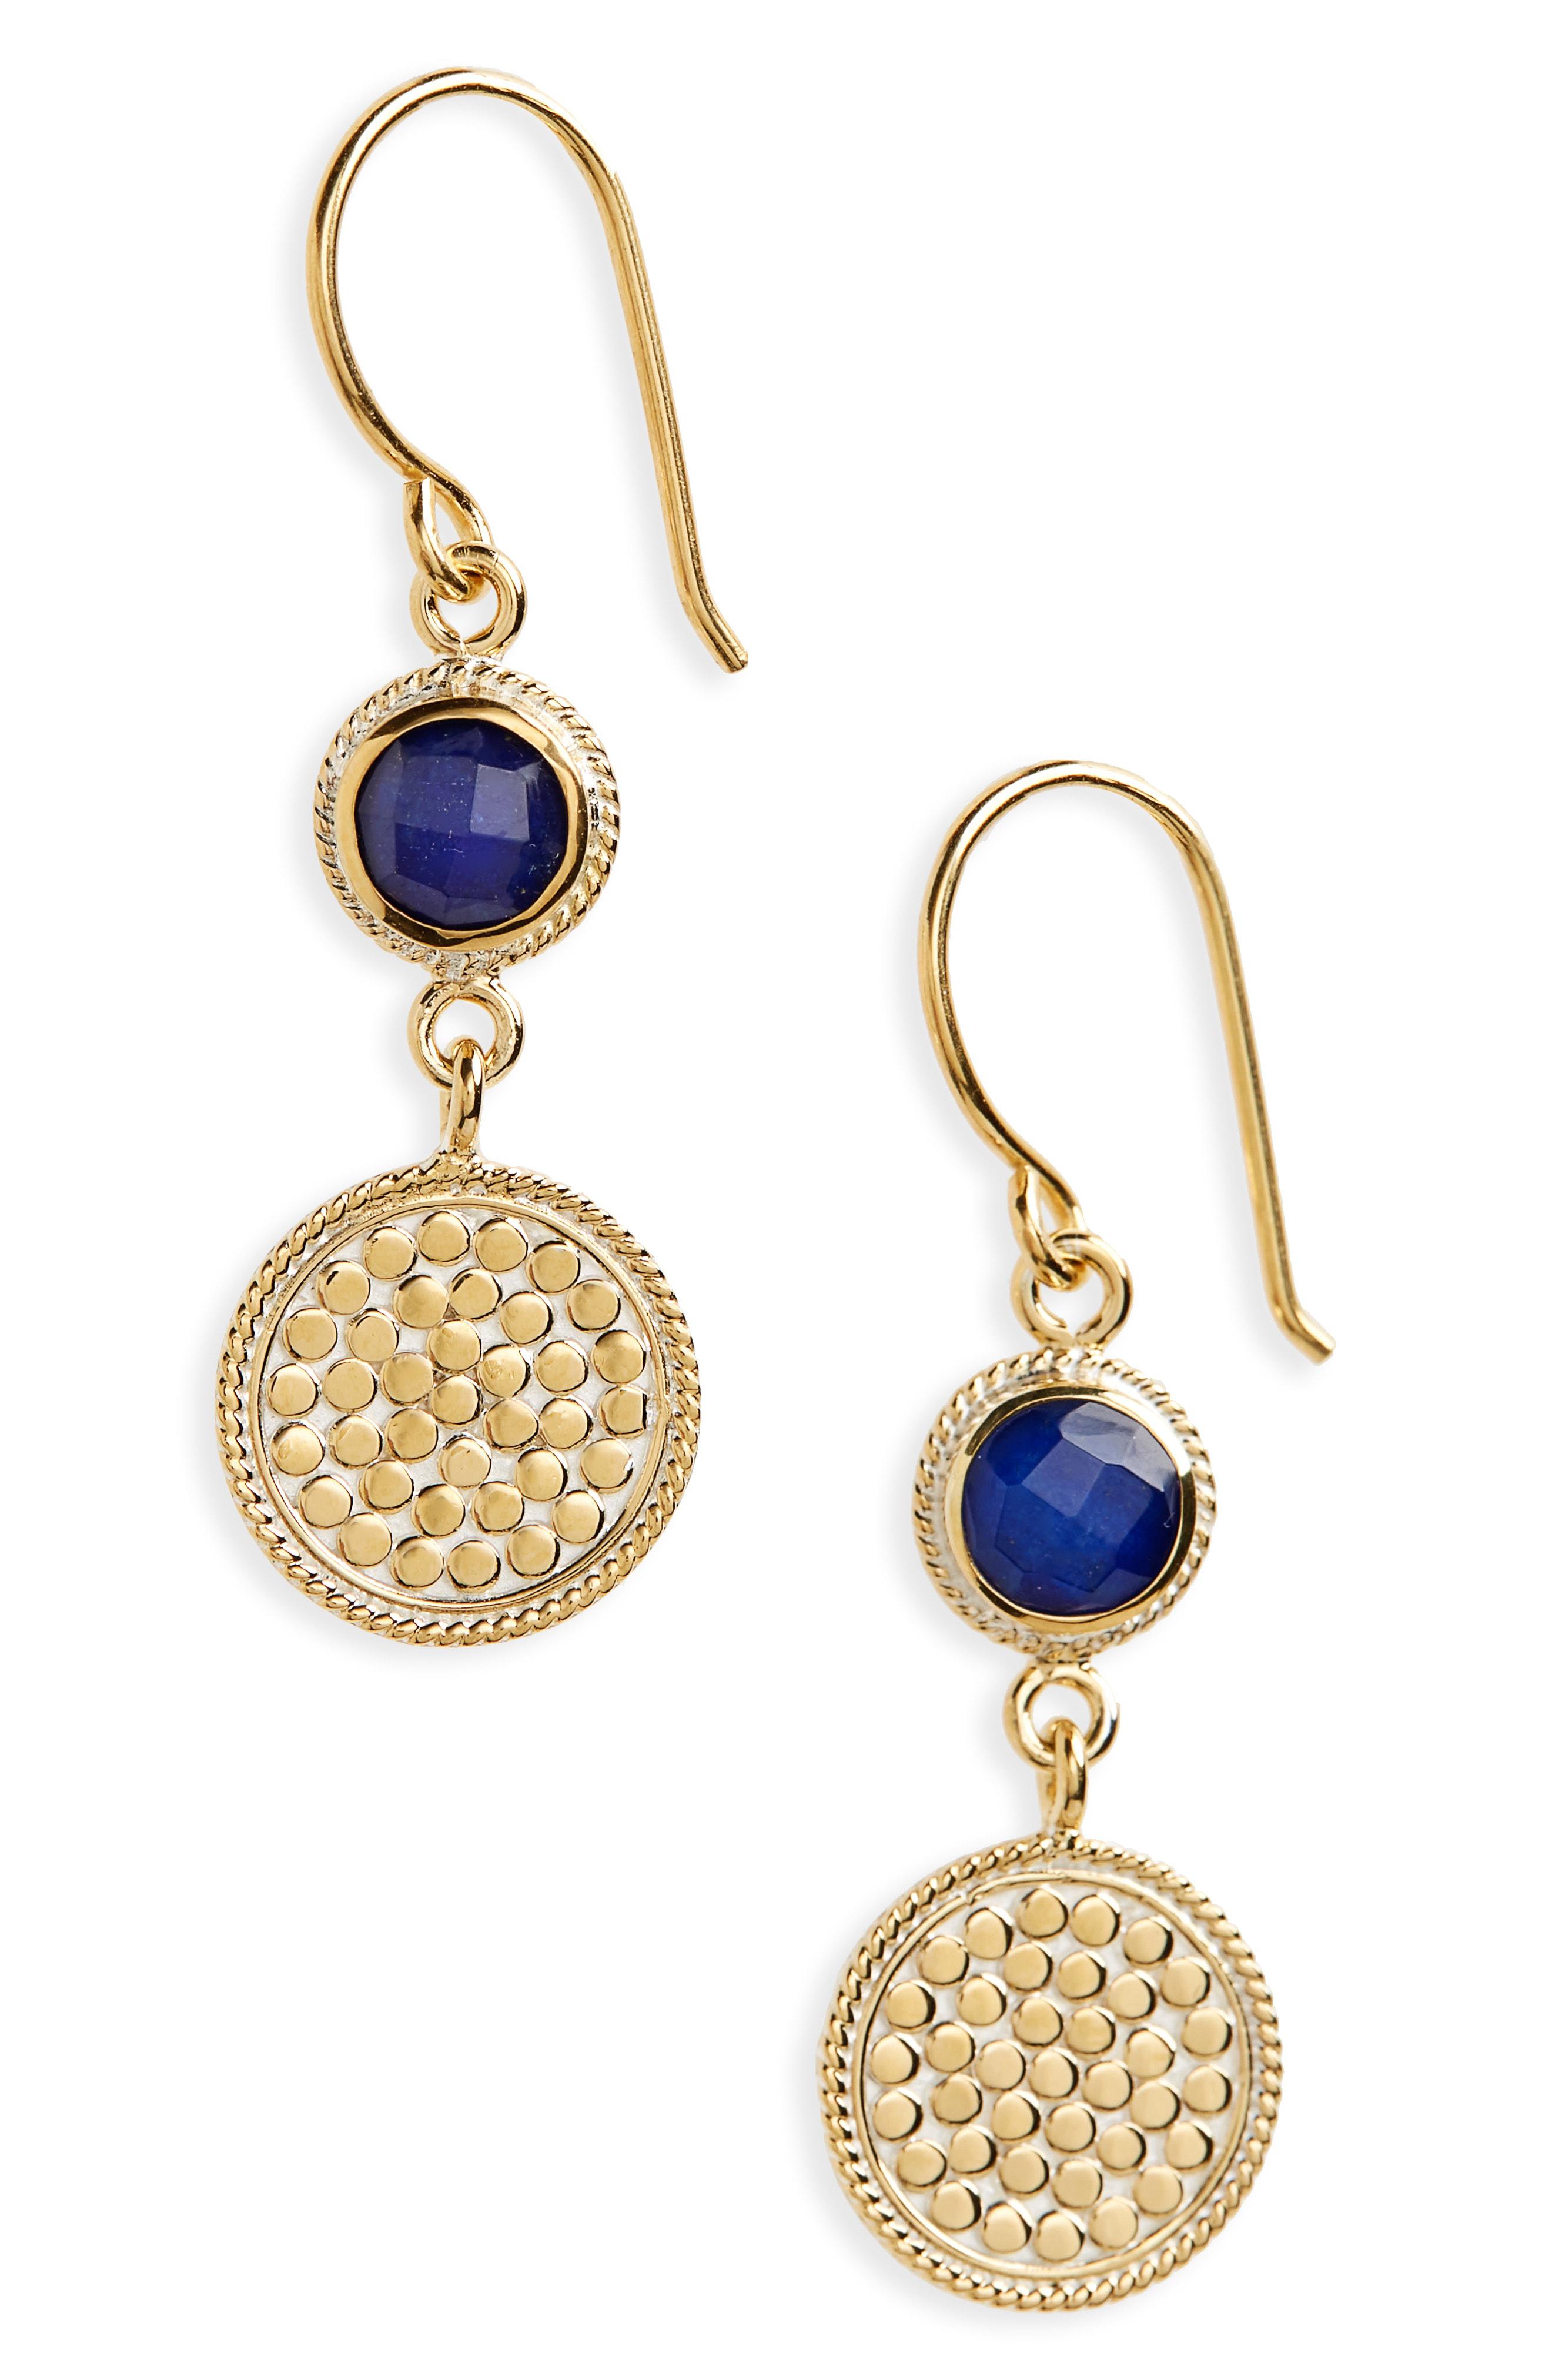 Lyst - Anna Beck Semiprecious Stone Double Drop Earrings in Blue